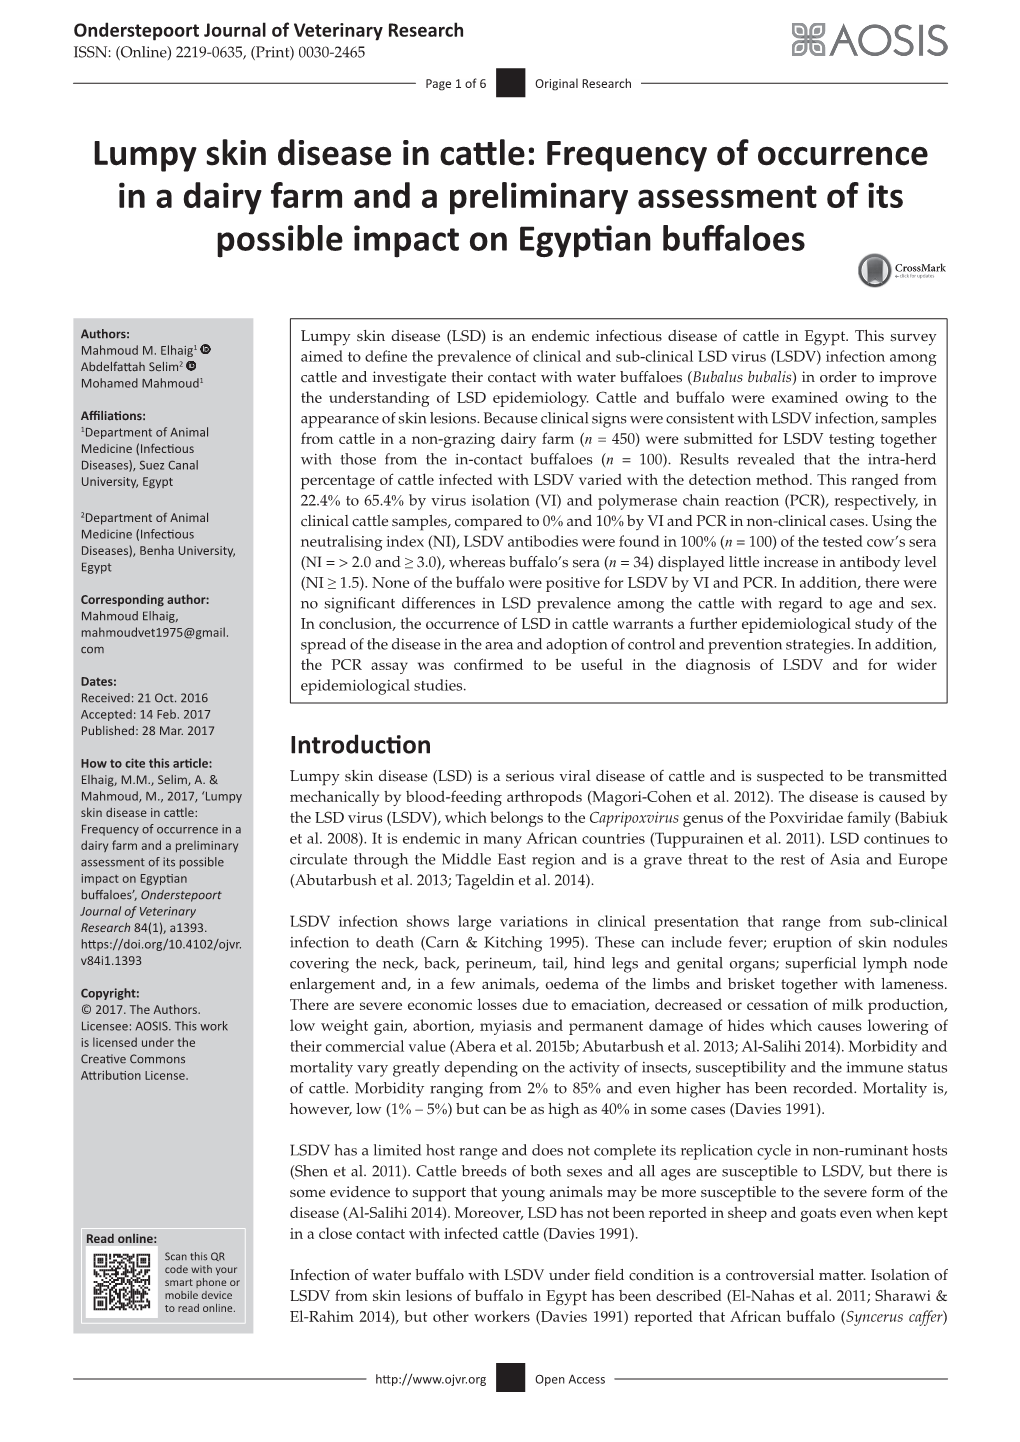 Lumpy Skin Disease in Cattle: Frequency of Occurrence in a Dairy Farm and a Preliminary Assessment of Its Possible Impact on Egyptian Buffaloes